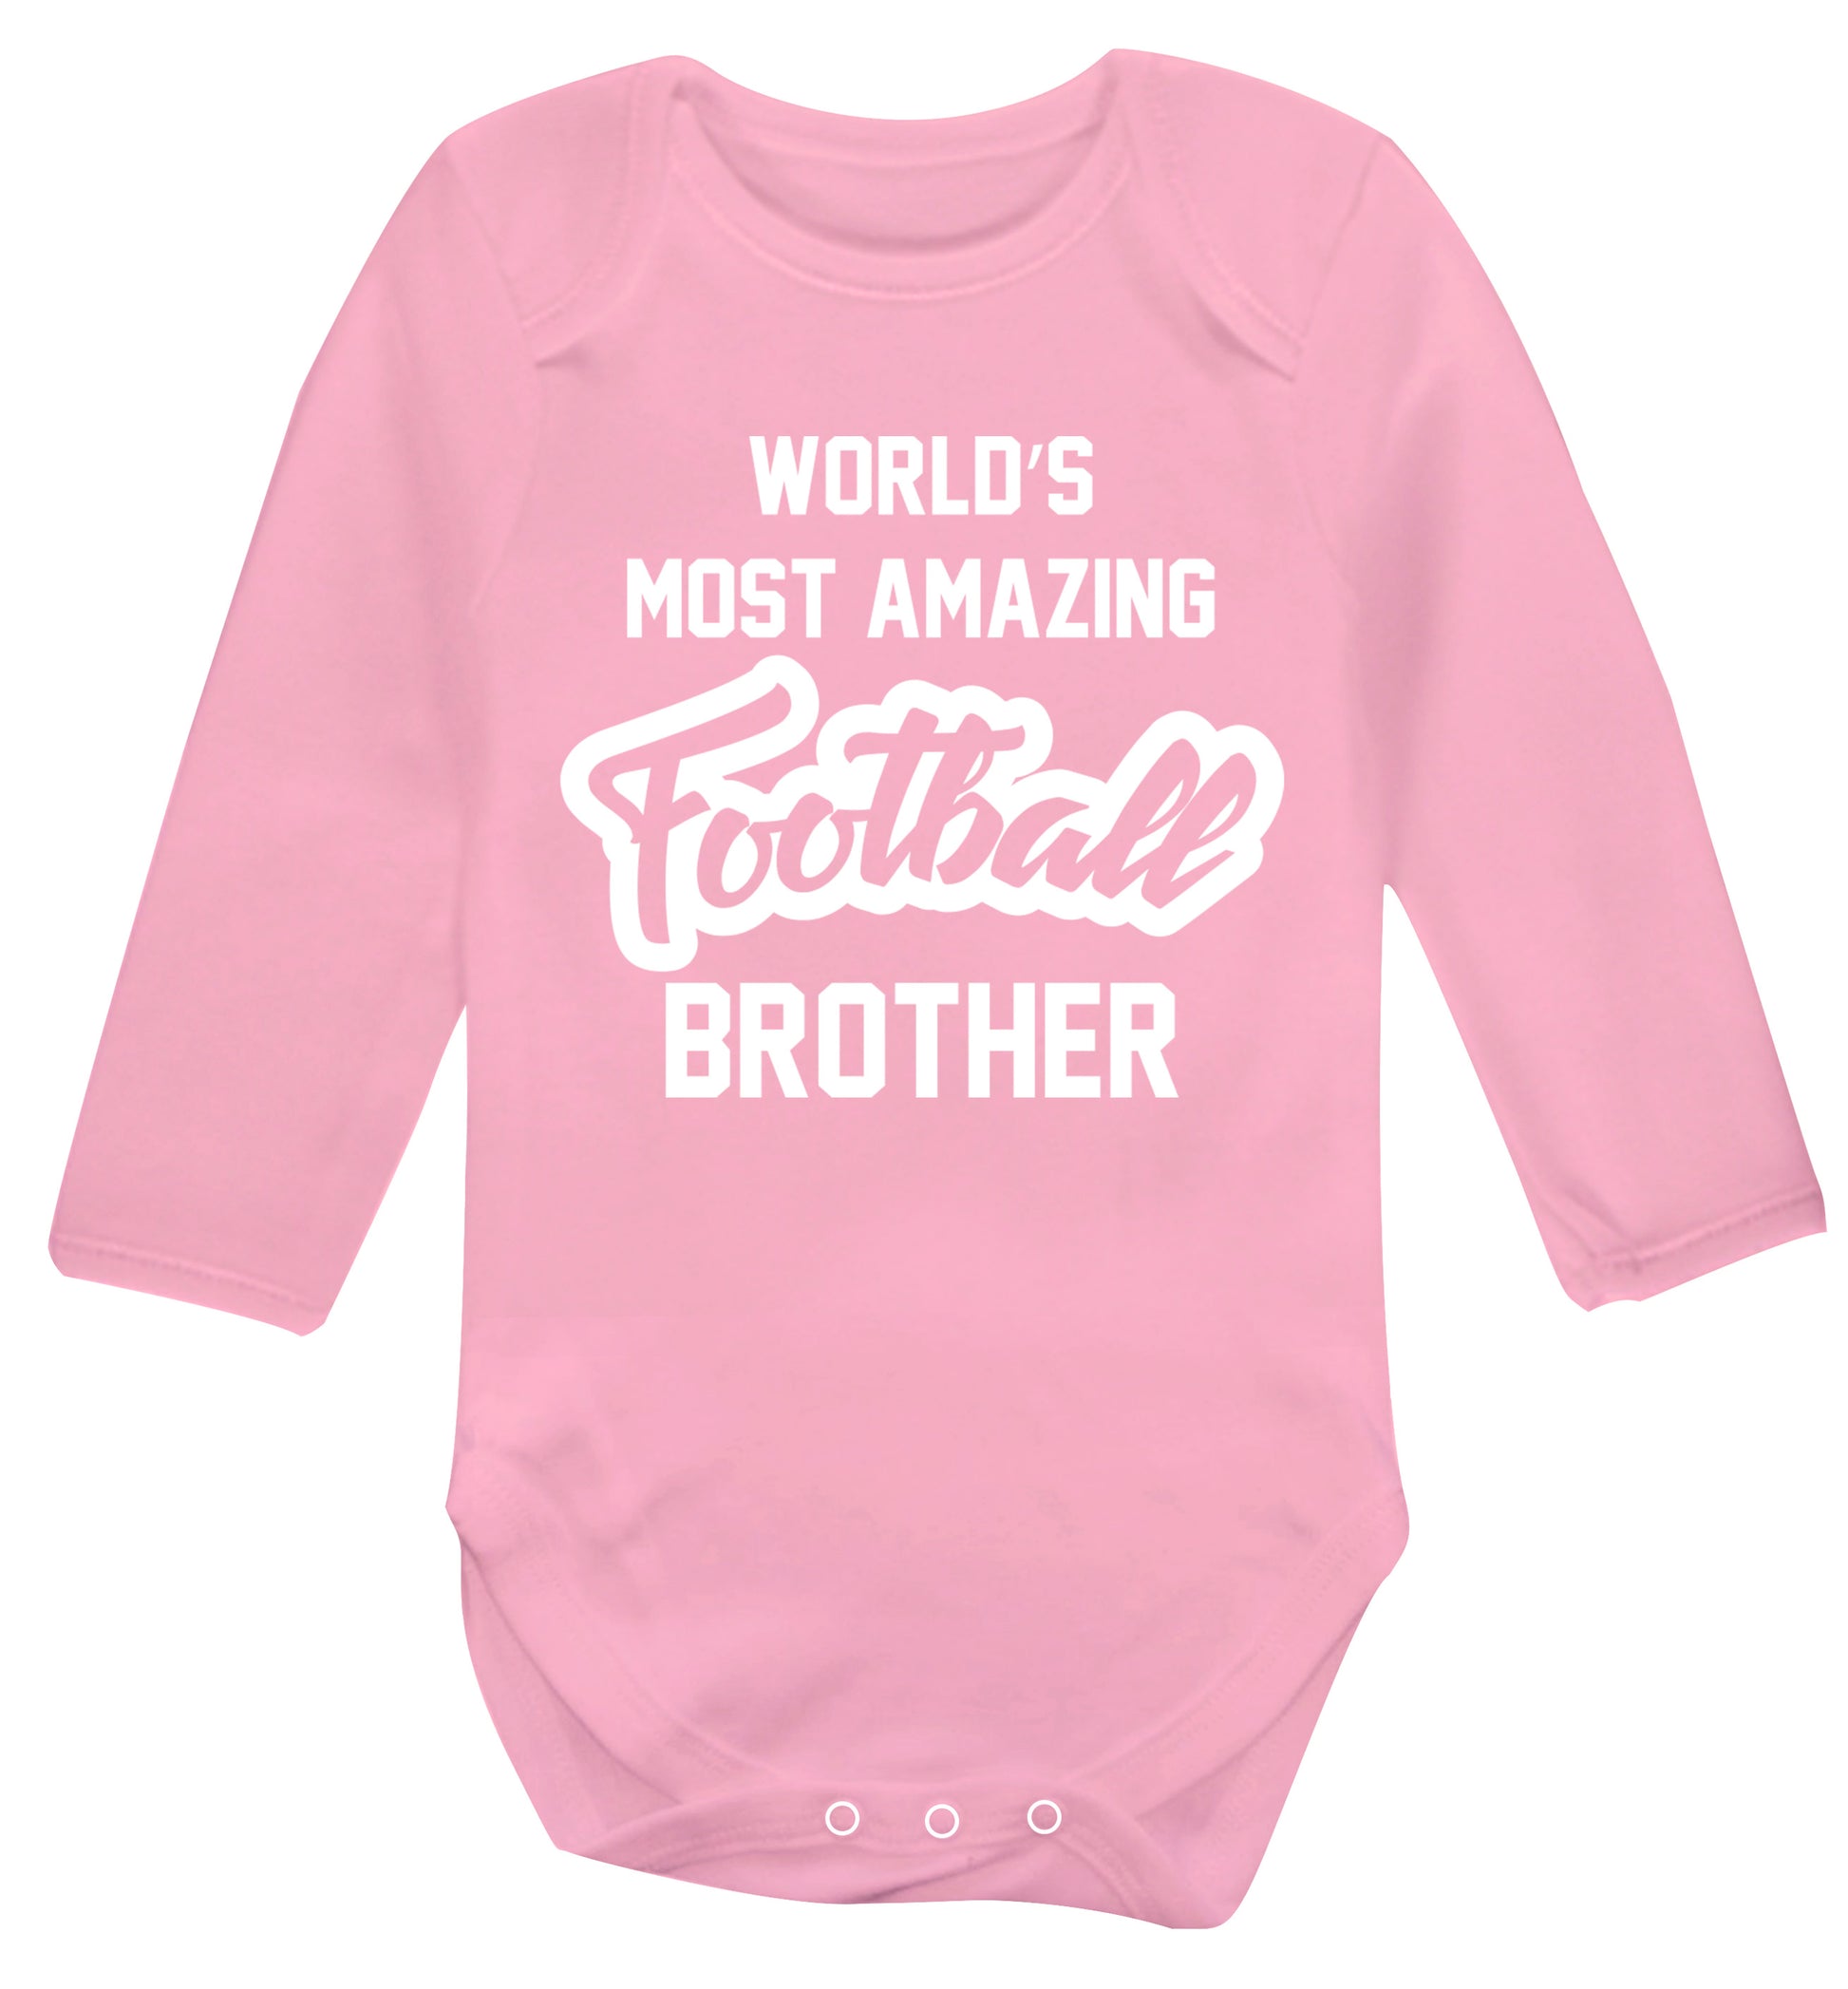 Worlds most amazing football brother Baby Vest long sleeved pale pink 6-12 months